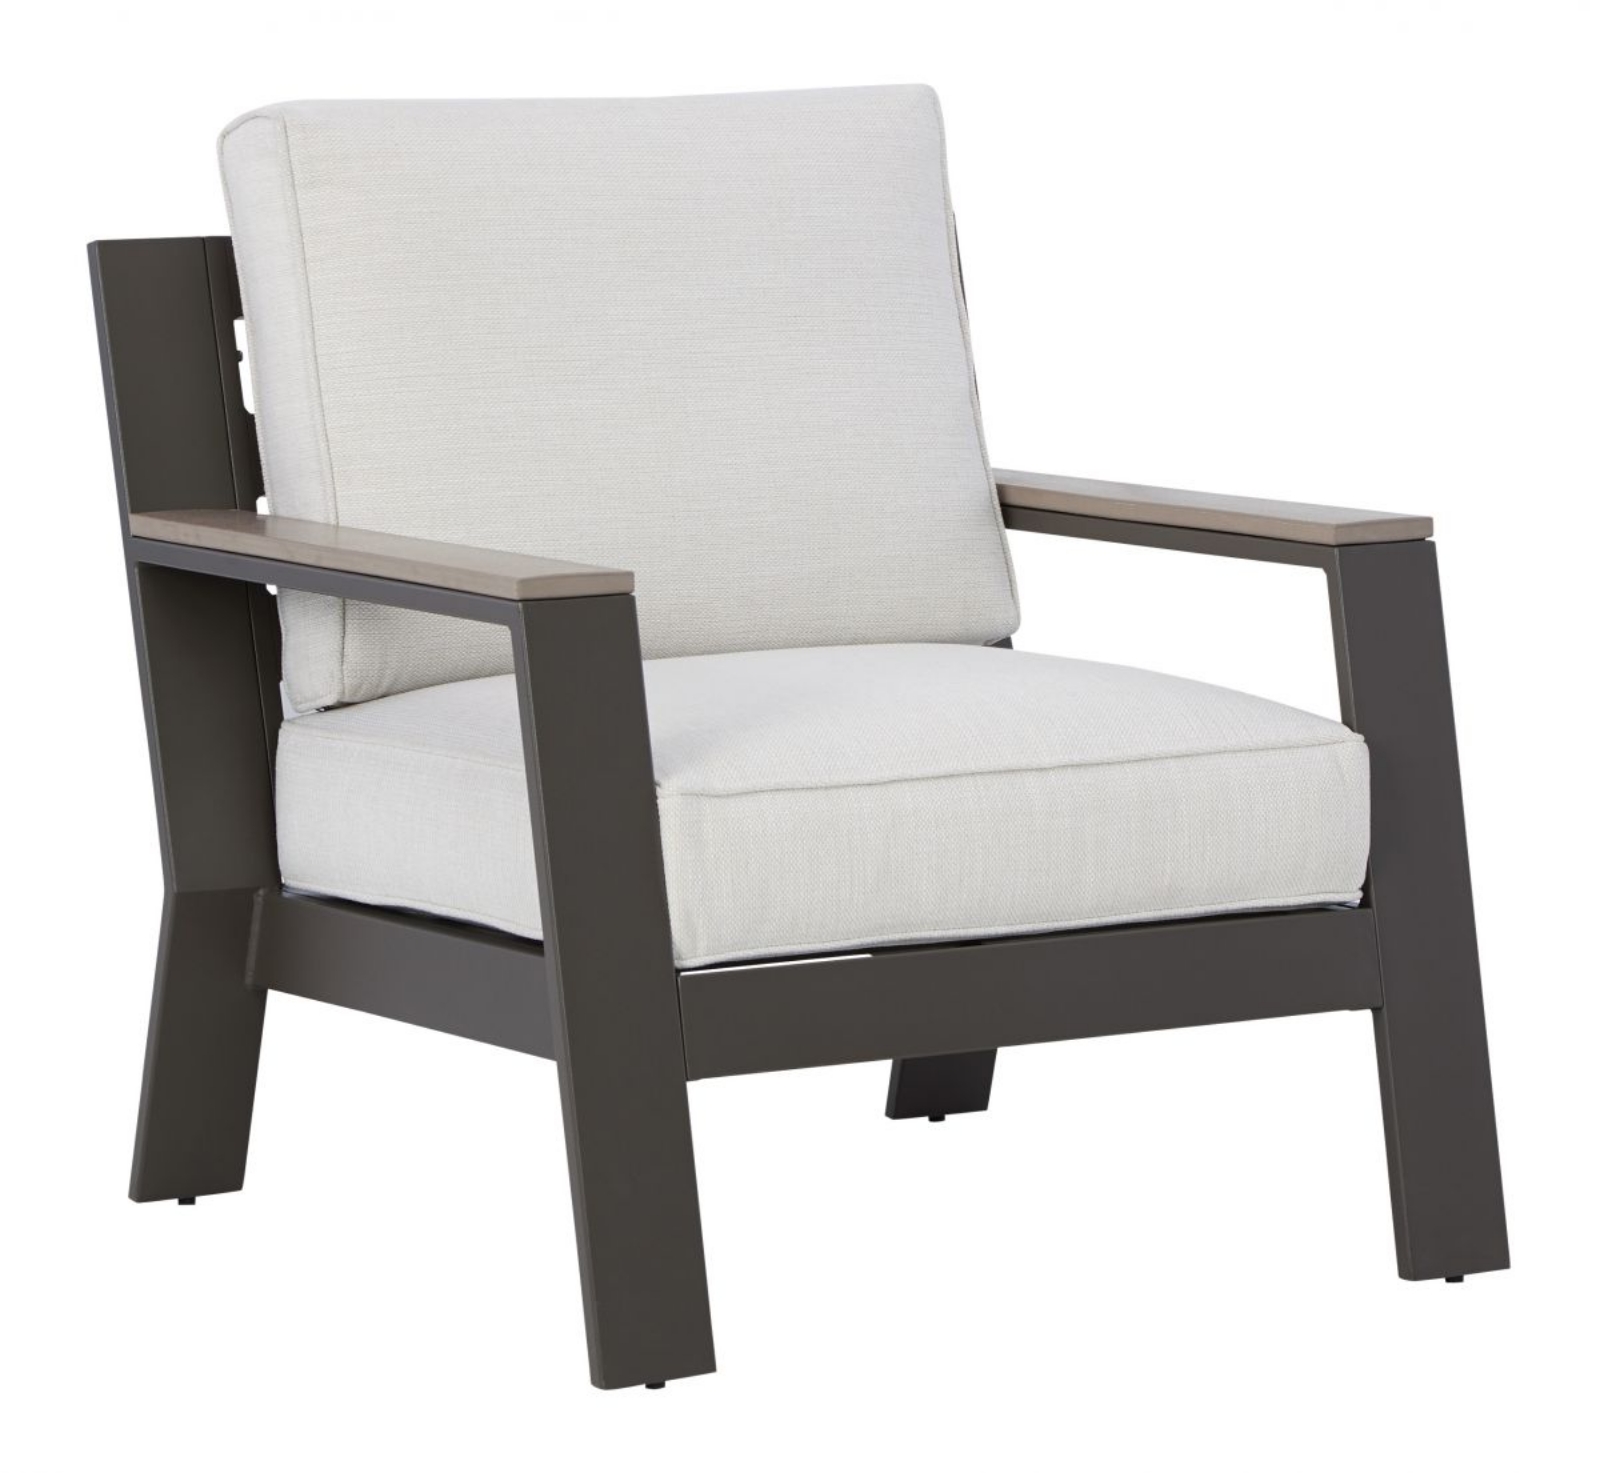 Picture of Tropicava Outdoor Chair